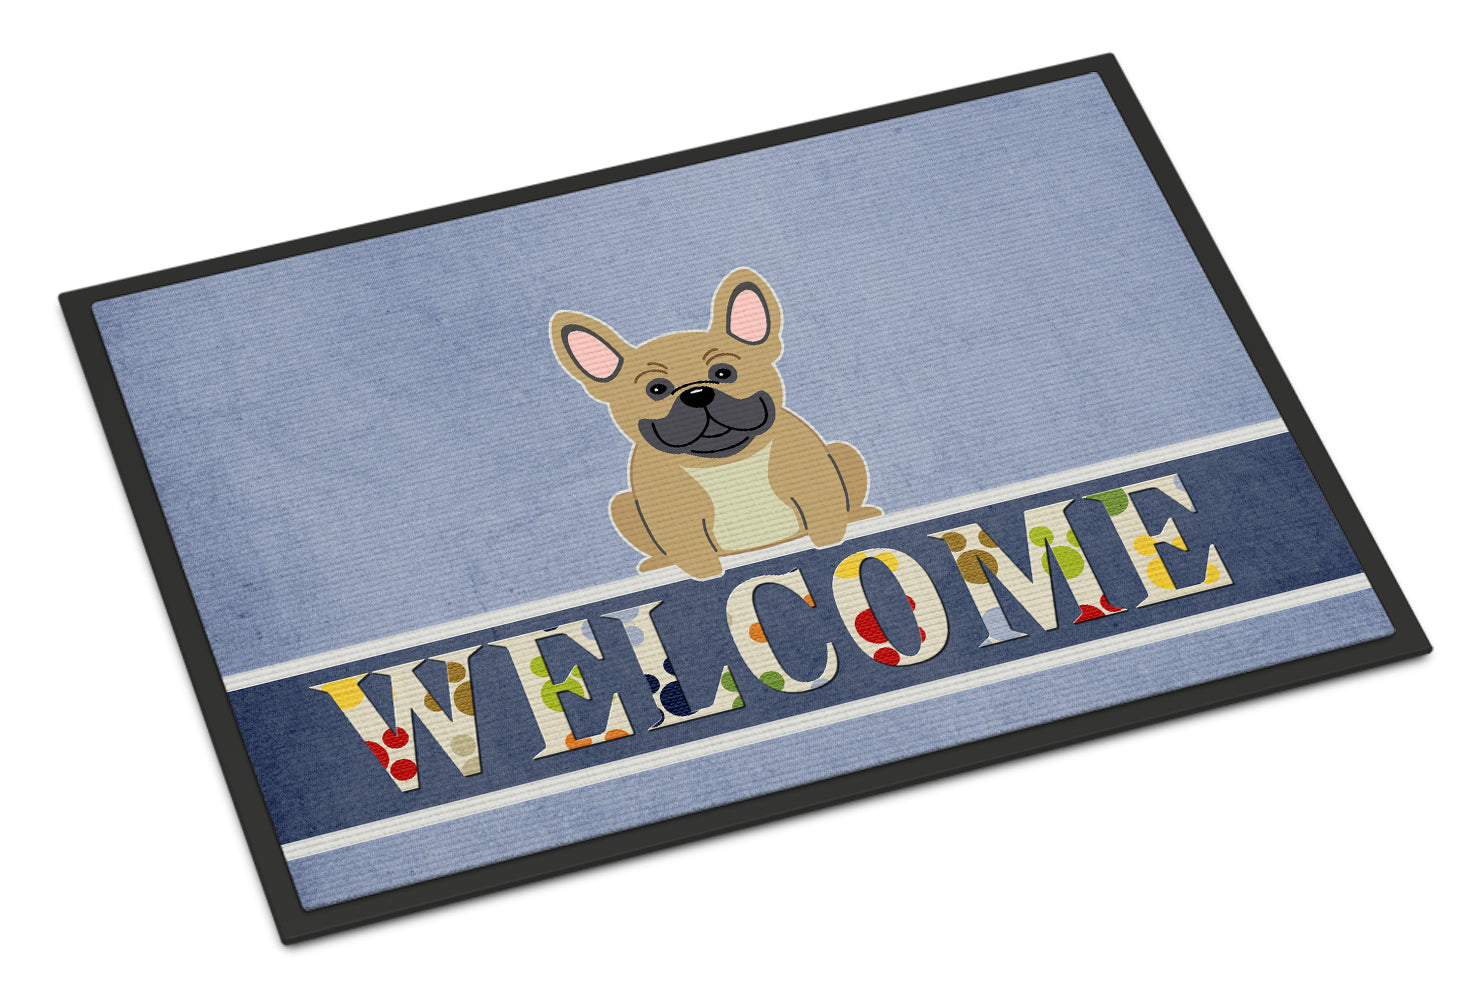 French Bulldog Cream Welcome Indoor or Outdoor Mat 18x27 BB5591MAT - the-store.com